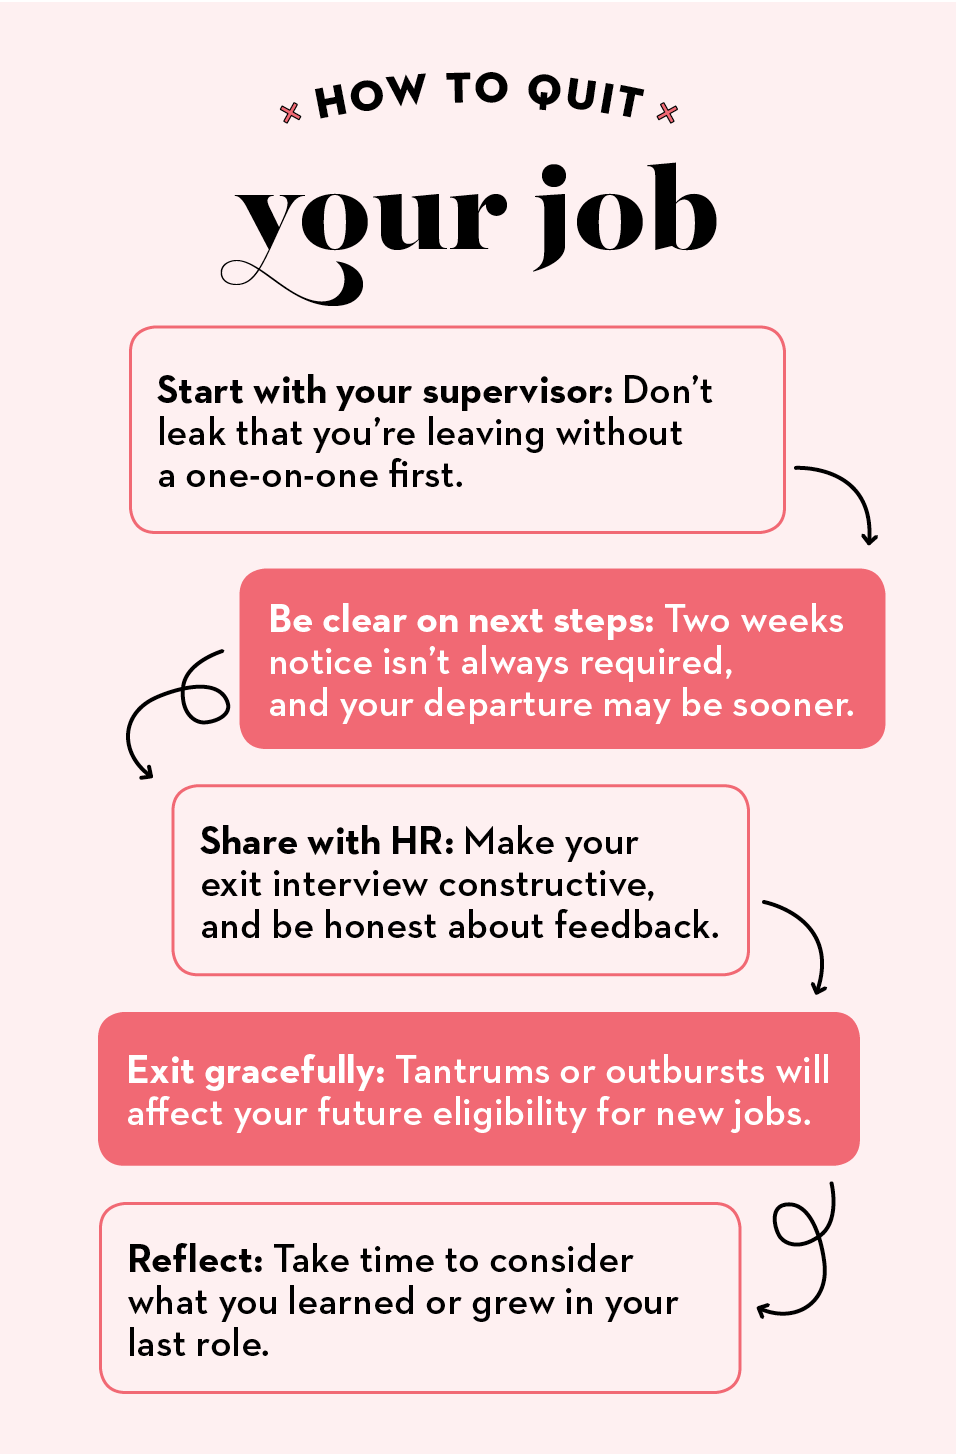 Quitting a job without another lined up: a risky move or a leap of